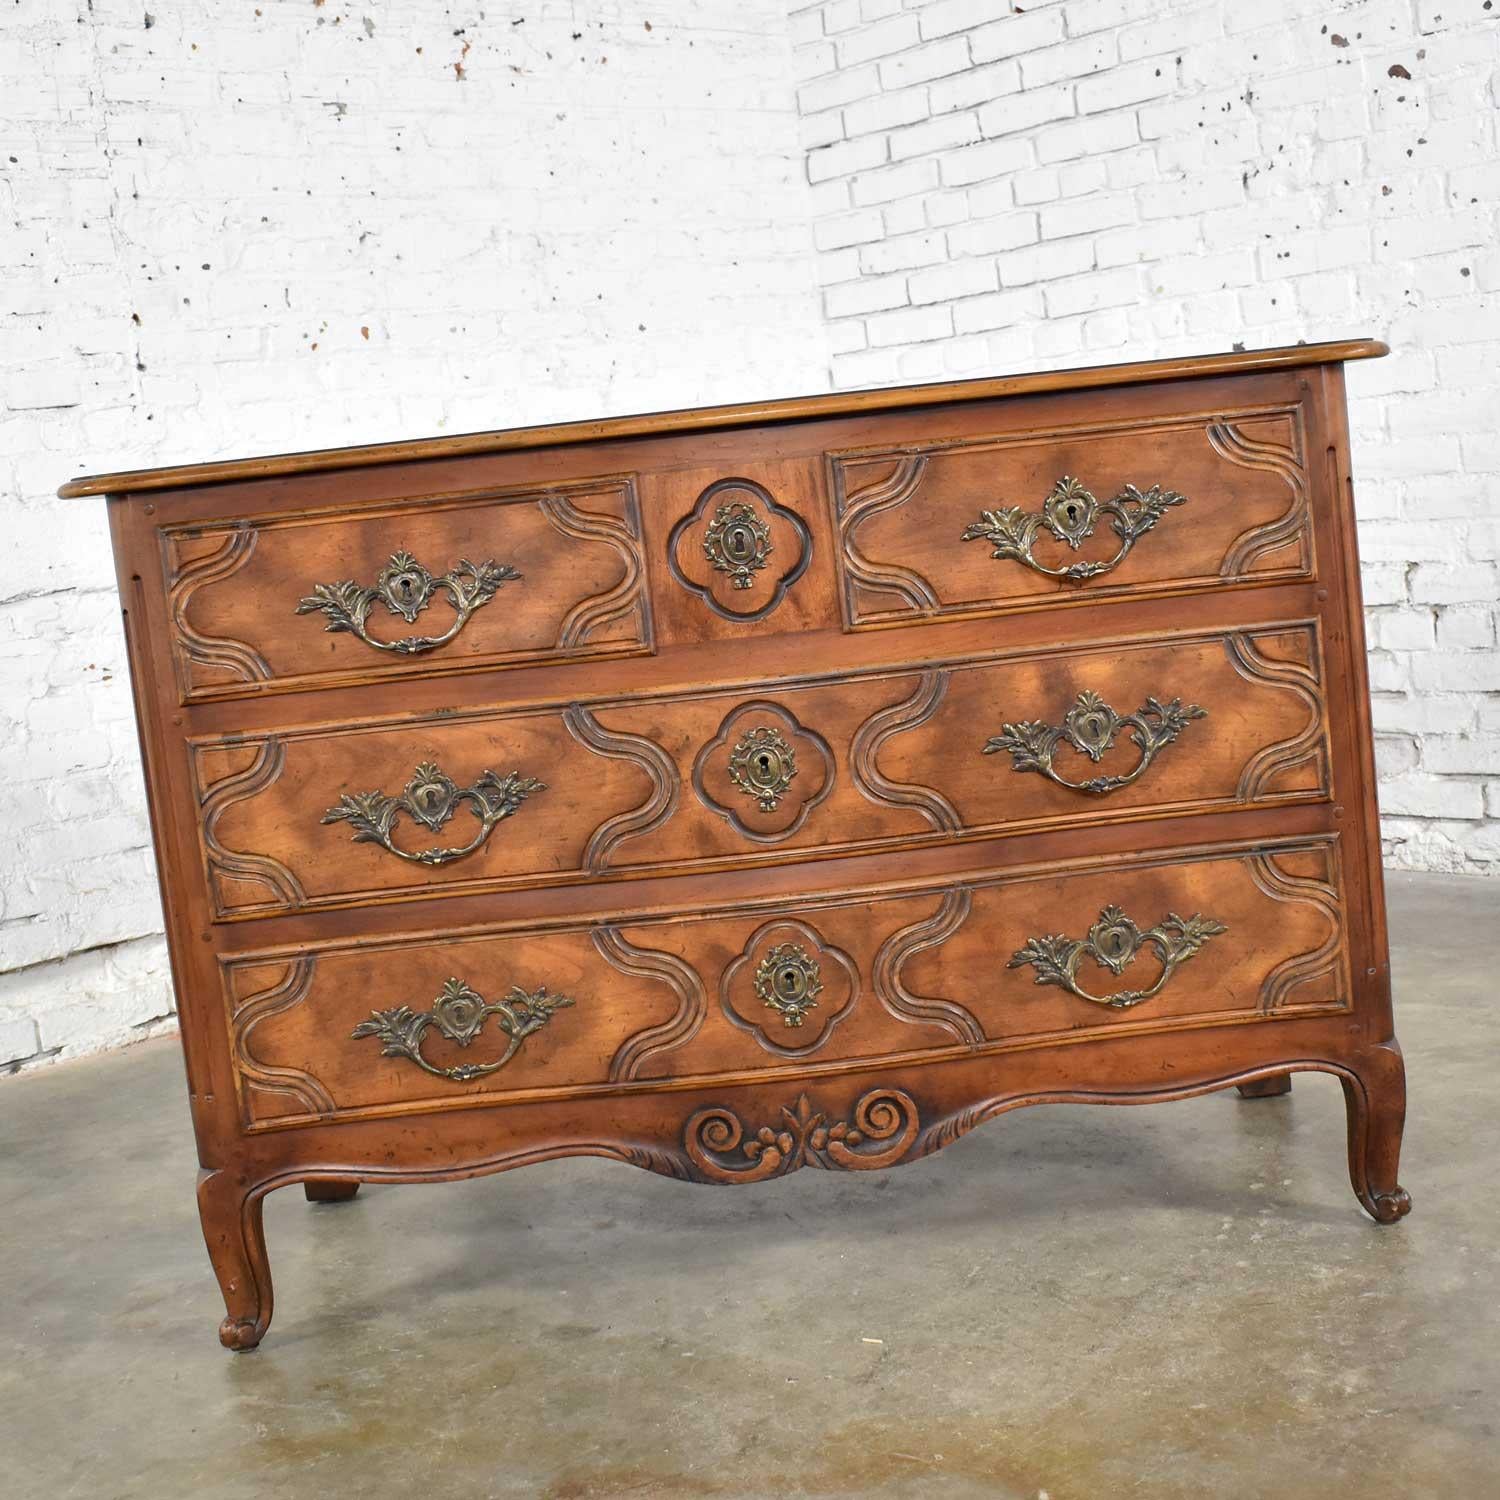 Handsome Baker Furniture bachelor’s chest of drawers in the Country French Provincial style. It is in fabulous vintage condition apart from a slight raising of wood grain on places of the top which can only be felt and not seen. Please see photos,